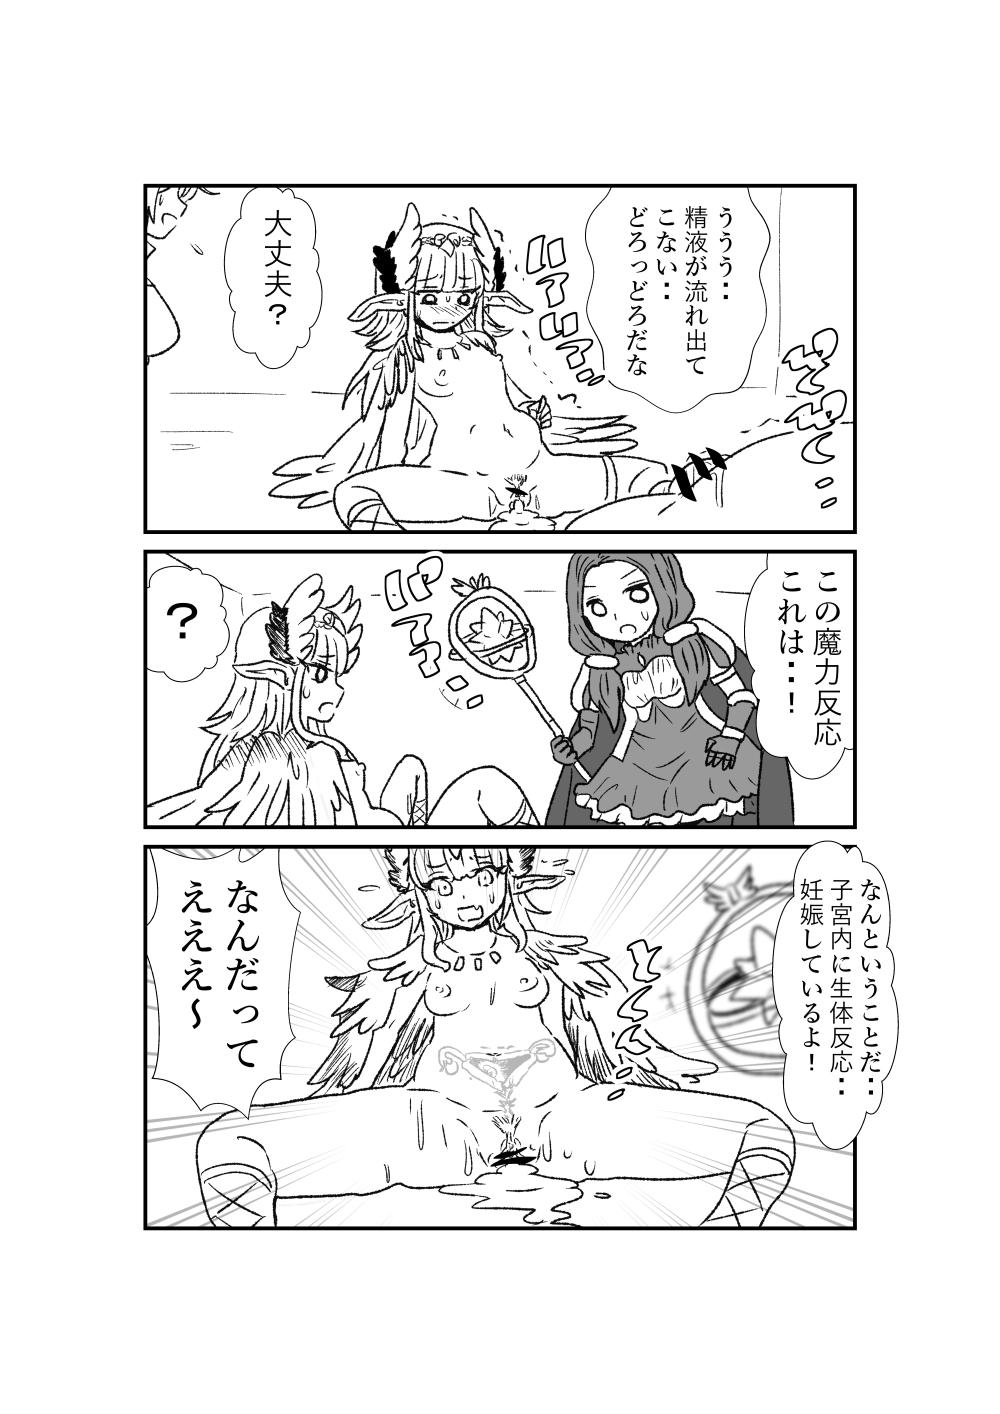 Amatuer FPO~桃色林檎の種付け周回～ - Fate grand order This - Page 8